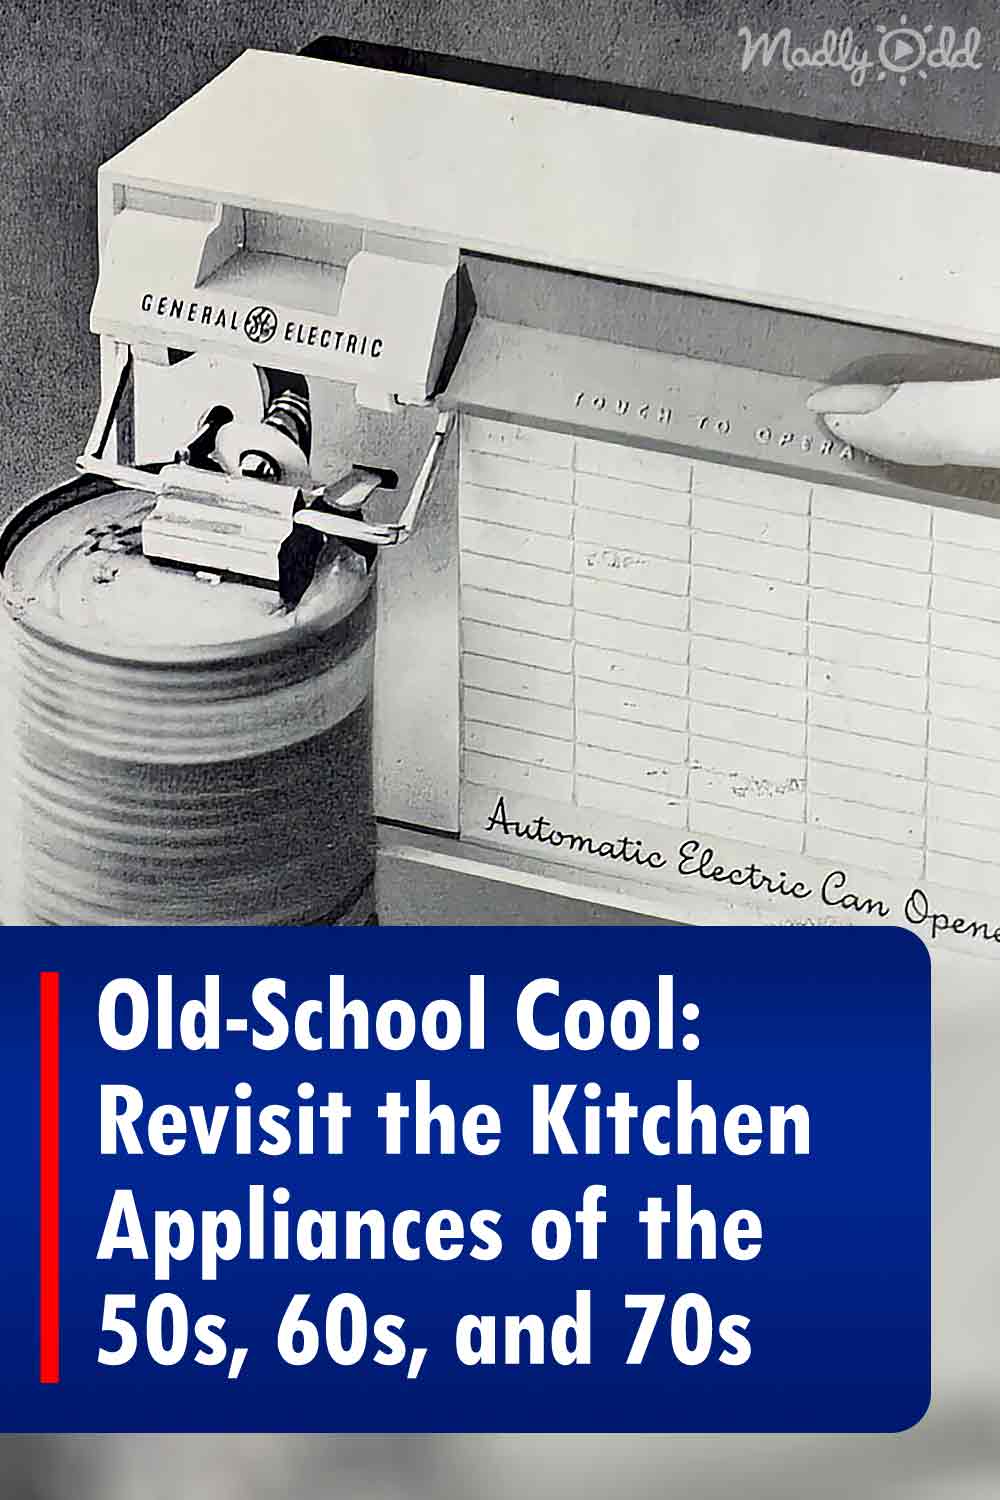 Old-School Cool: Revisit the Kitchen Appliances of the 50s, 60s, and 70s